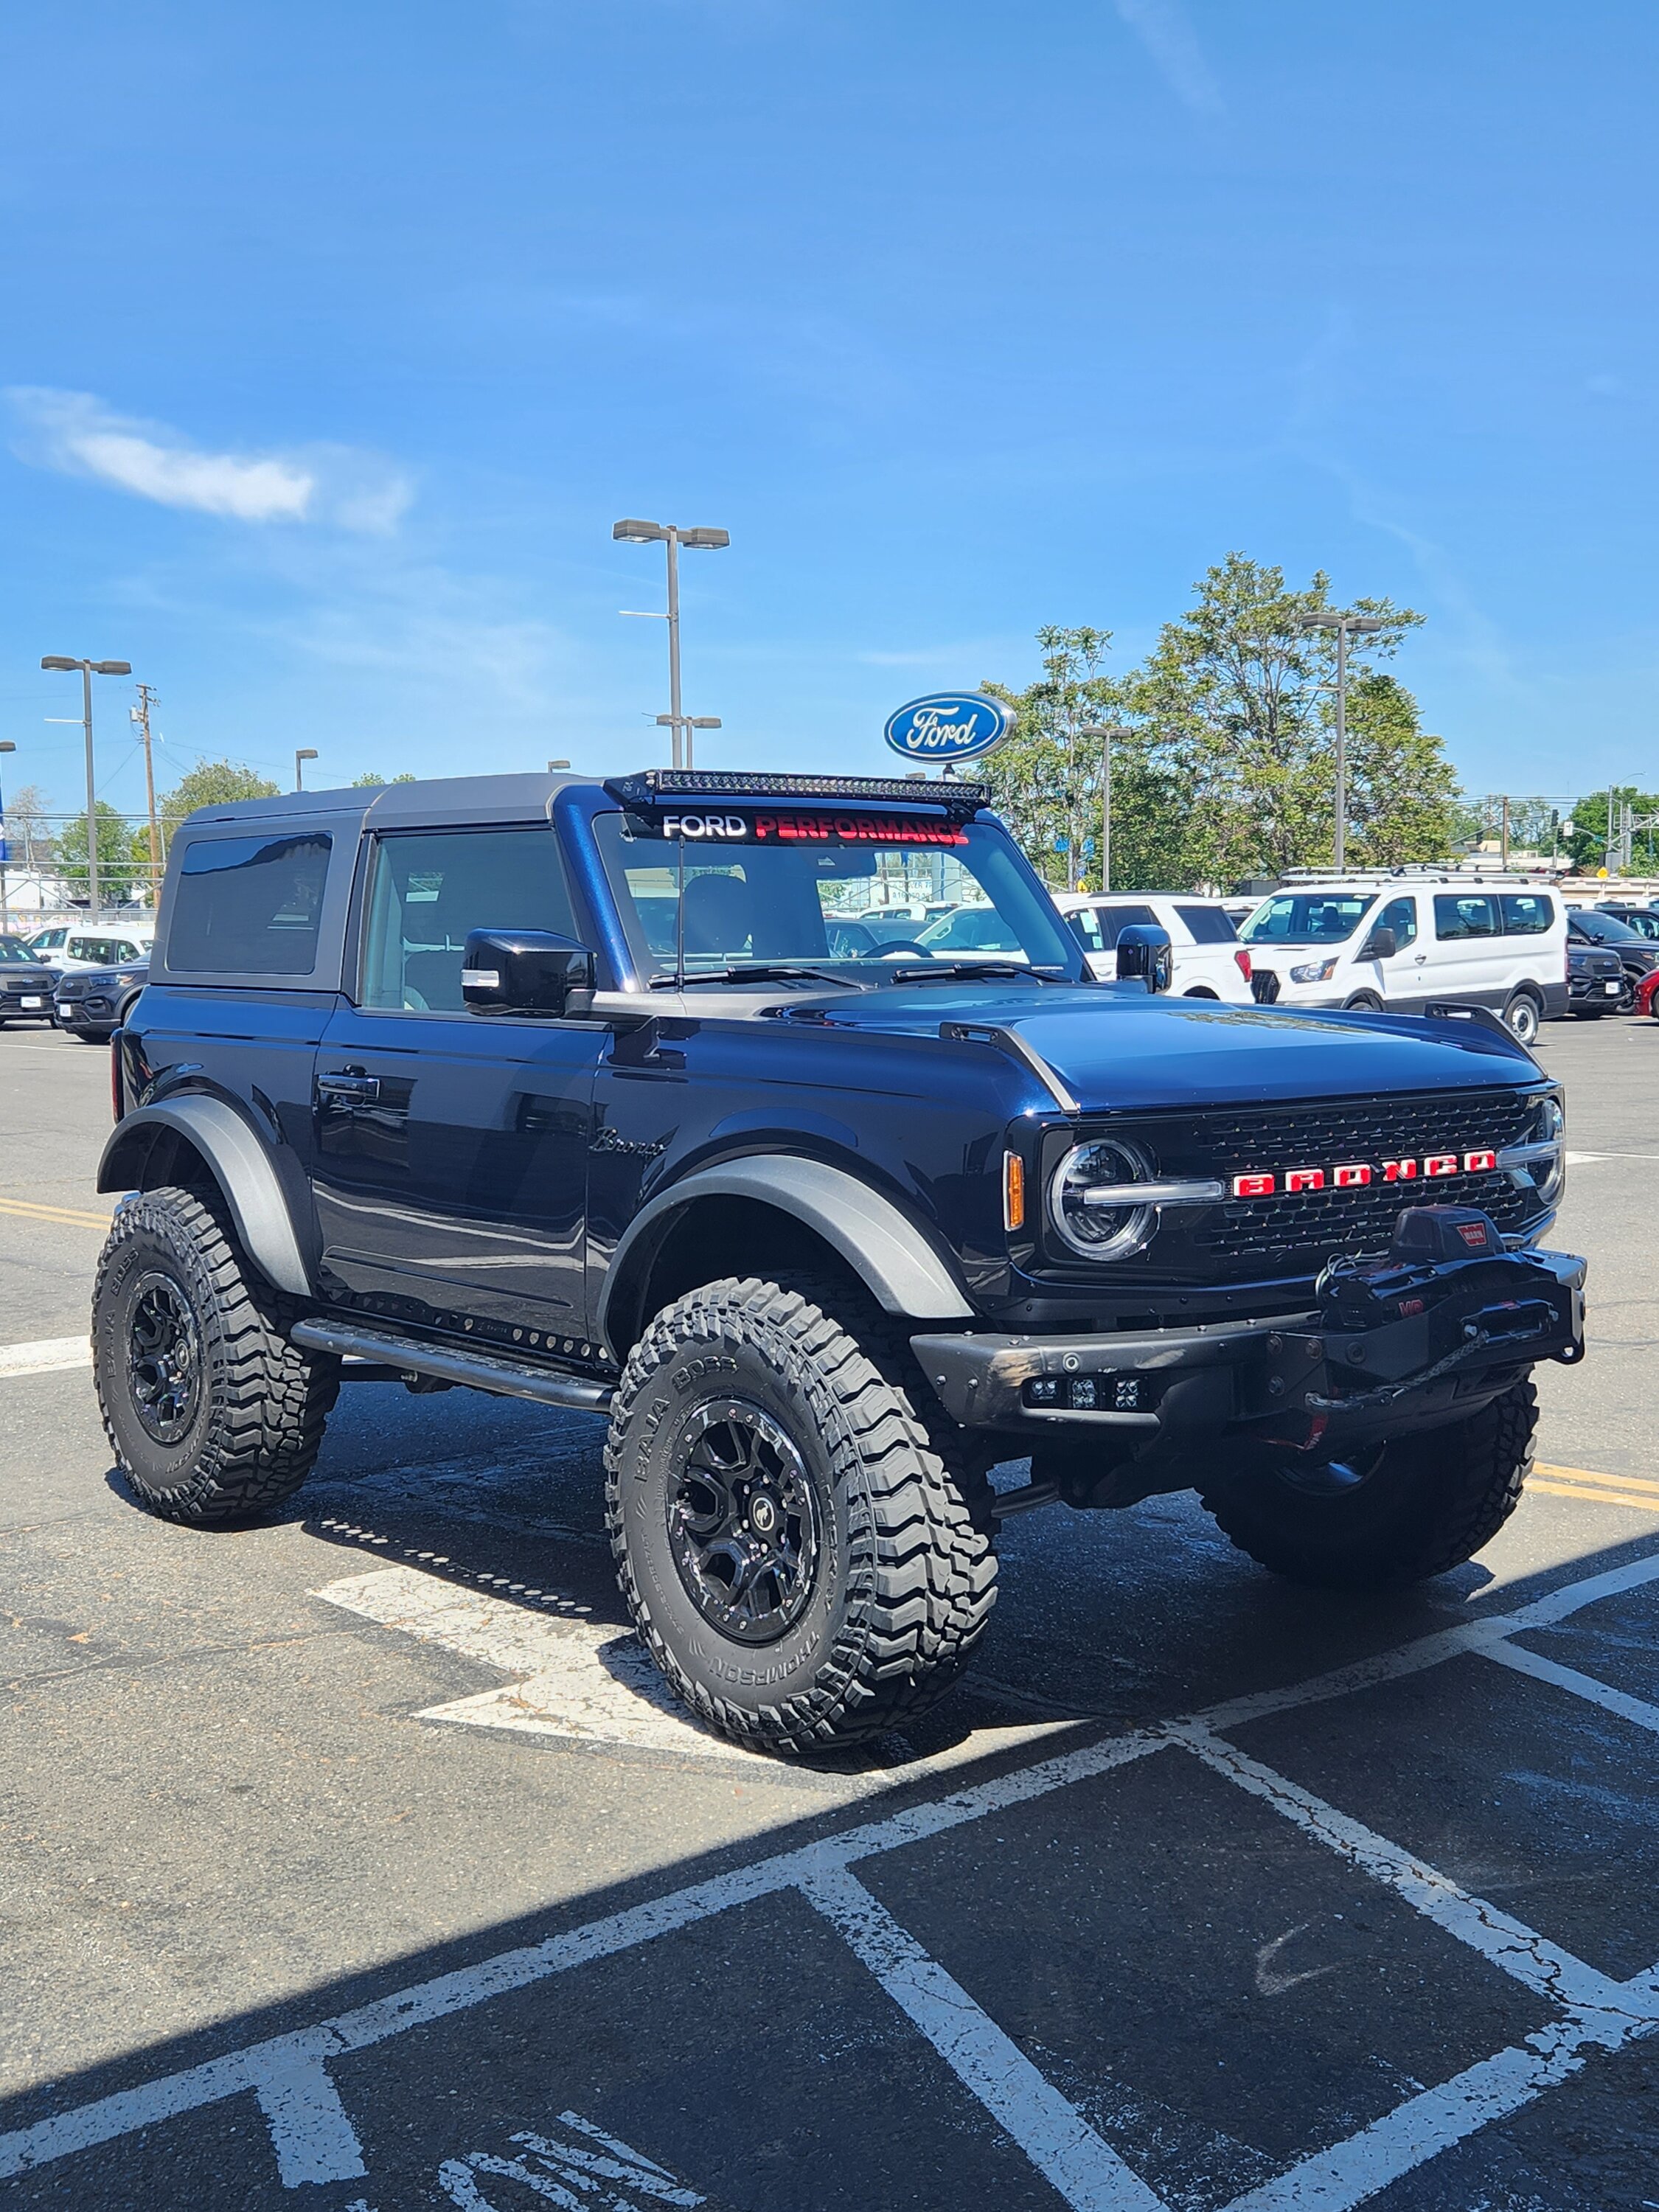 Ford Bronco 2 Door Broncos - What’s on your roof racks? [Photos Thread] 20230426_114419